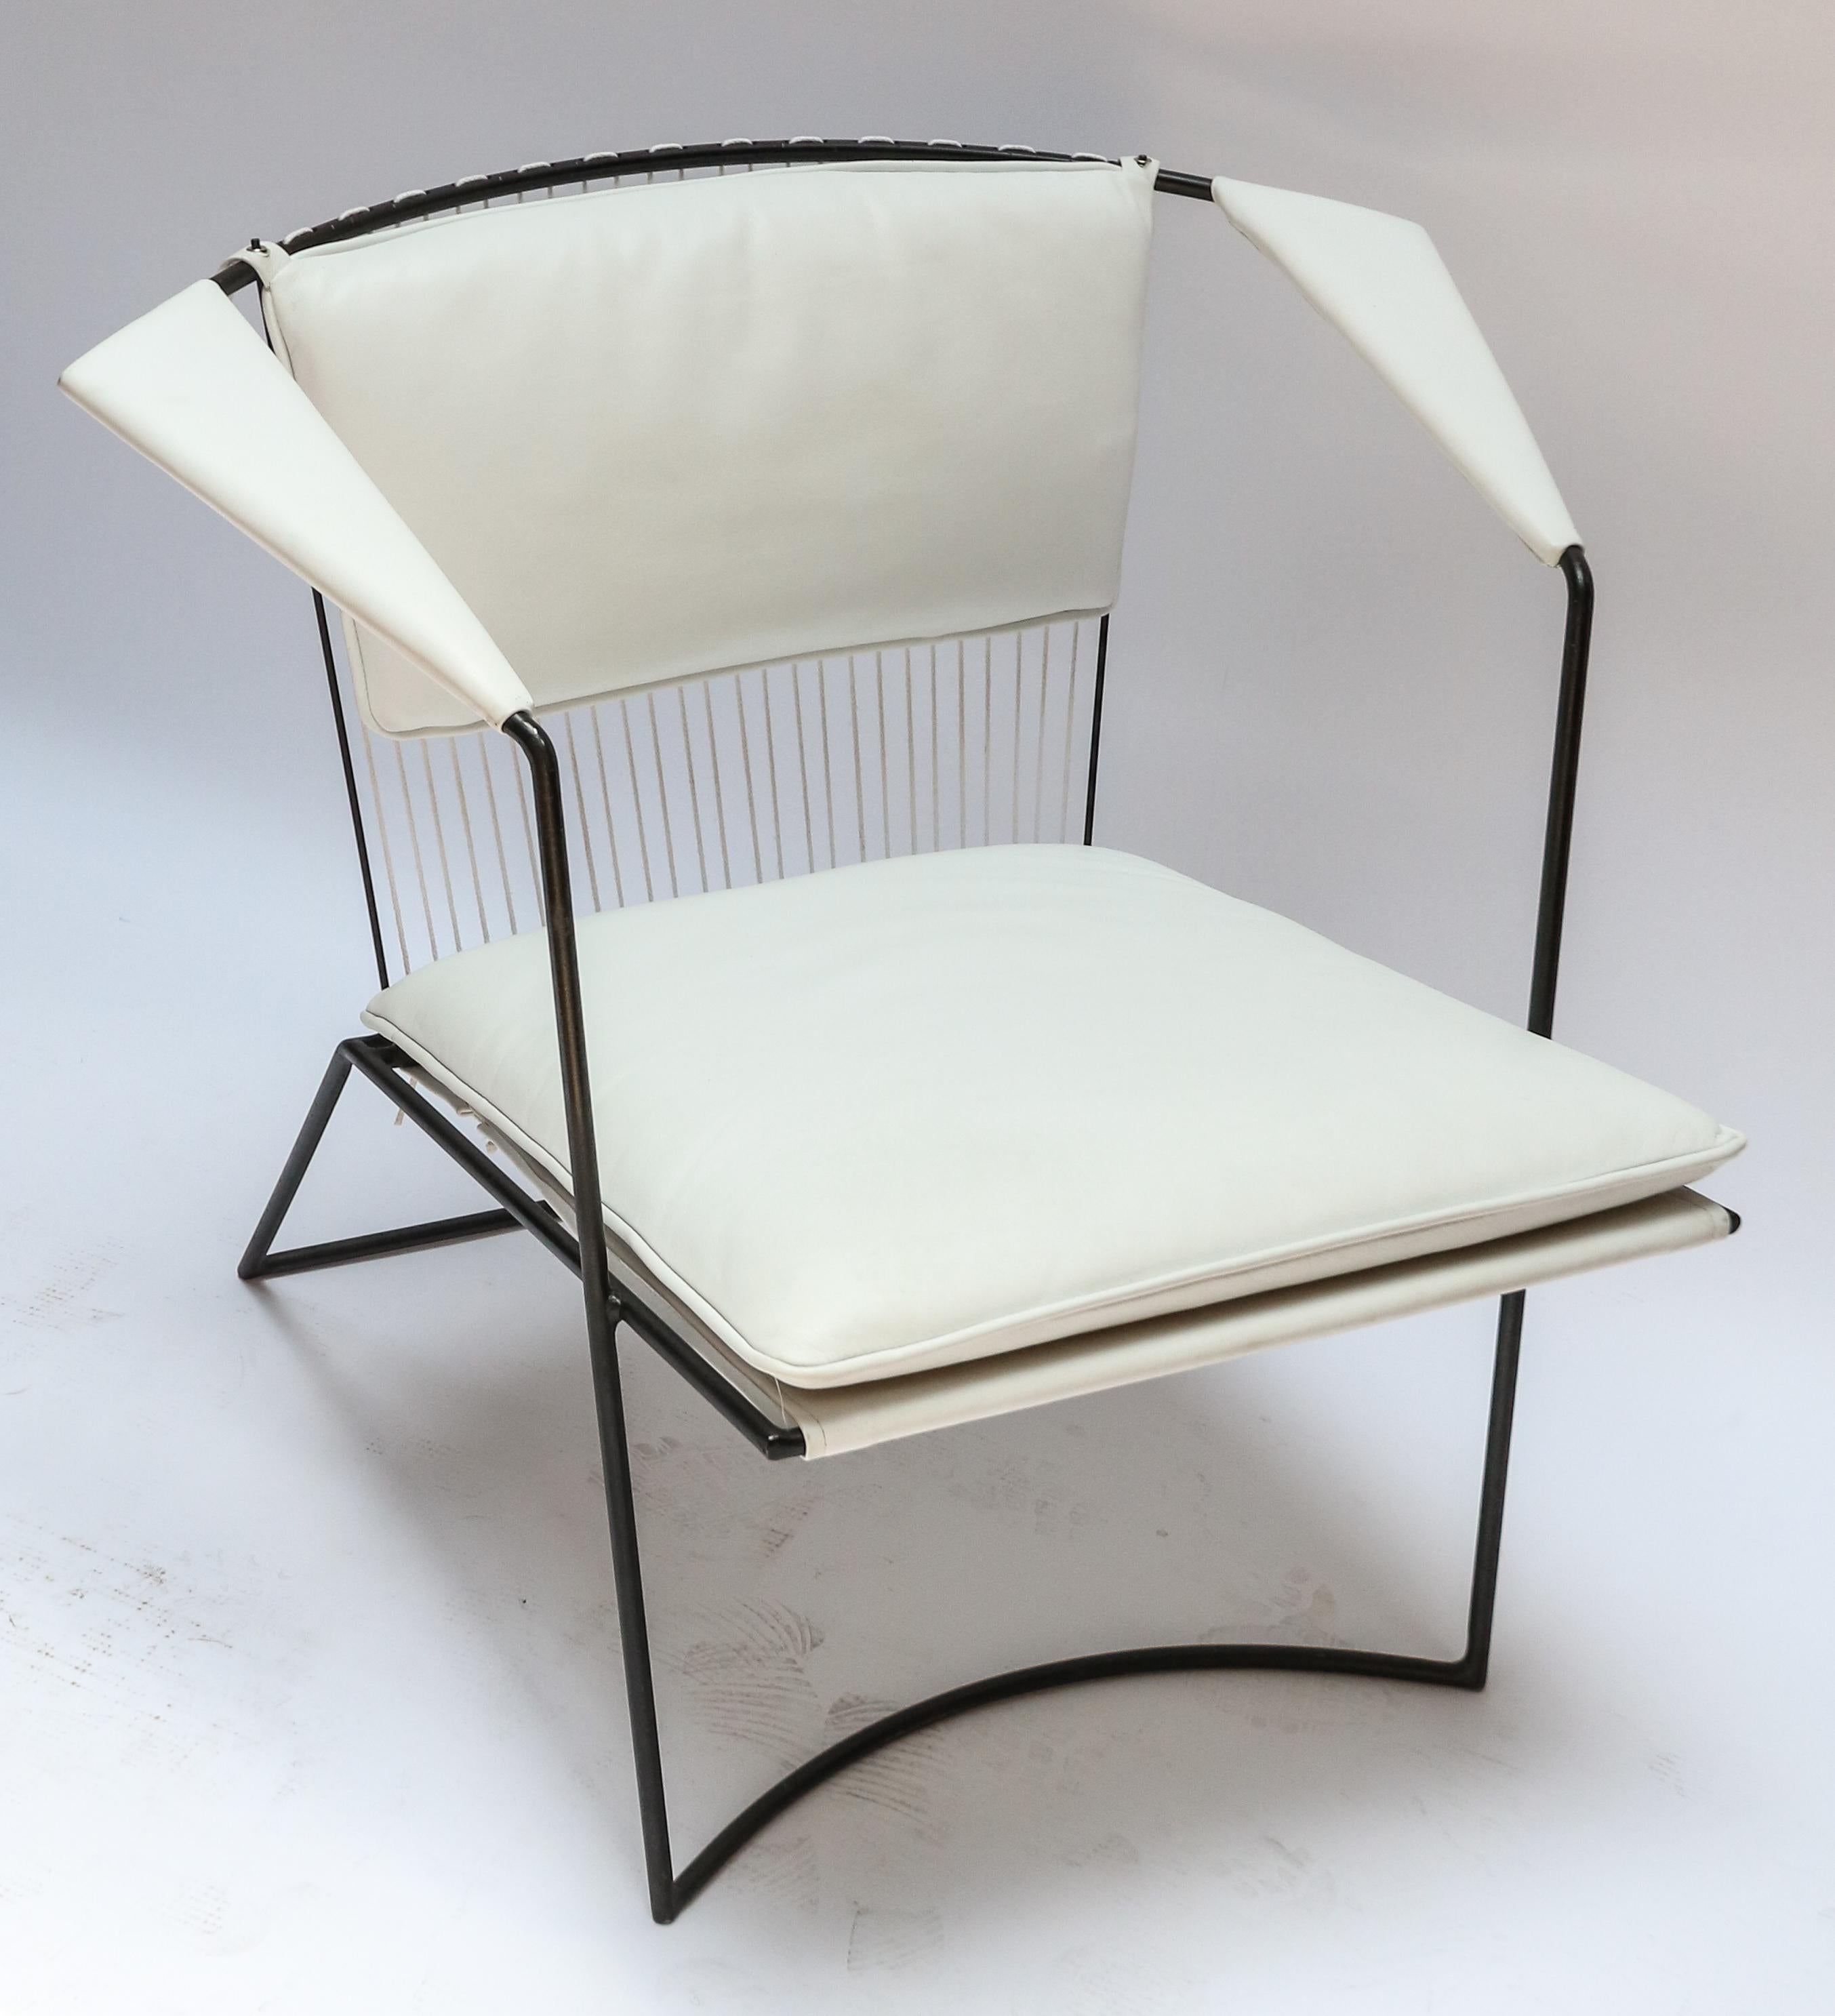 Custom metal armchairs in the style of Tenreiro upholstered in white leather by Adesso Imports.
Seat dimensions: 21.5? W x 22? D.